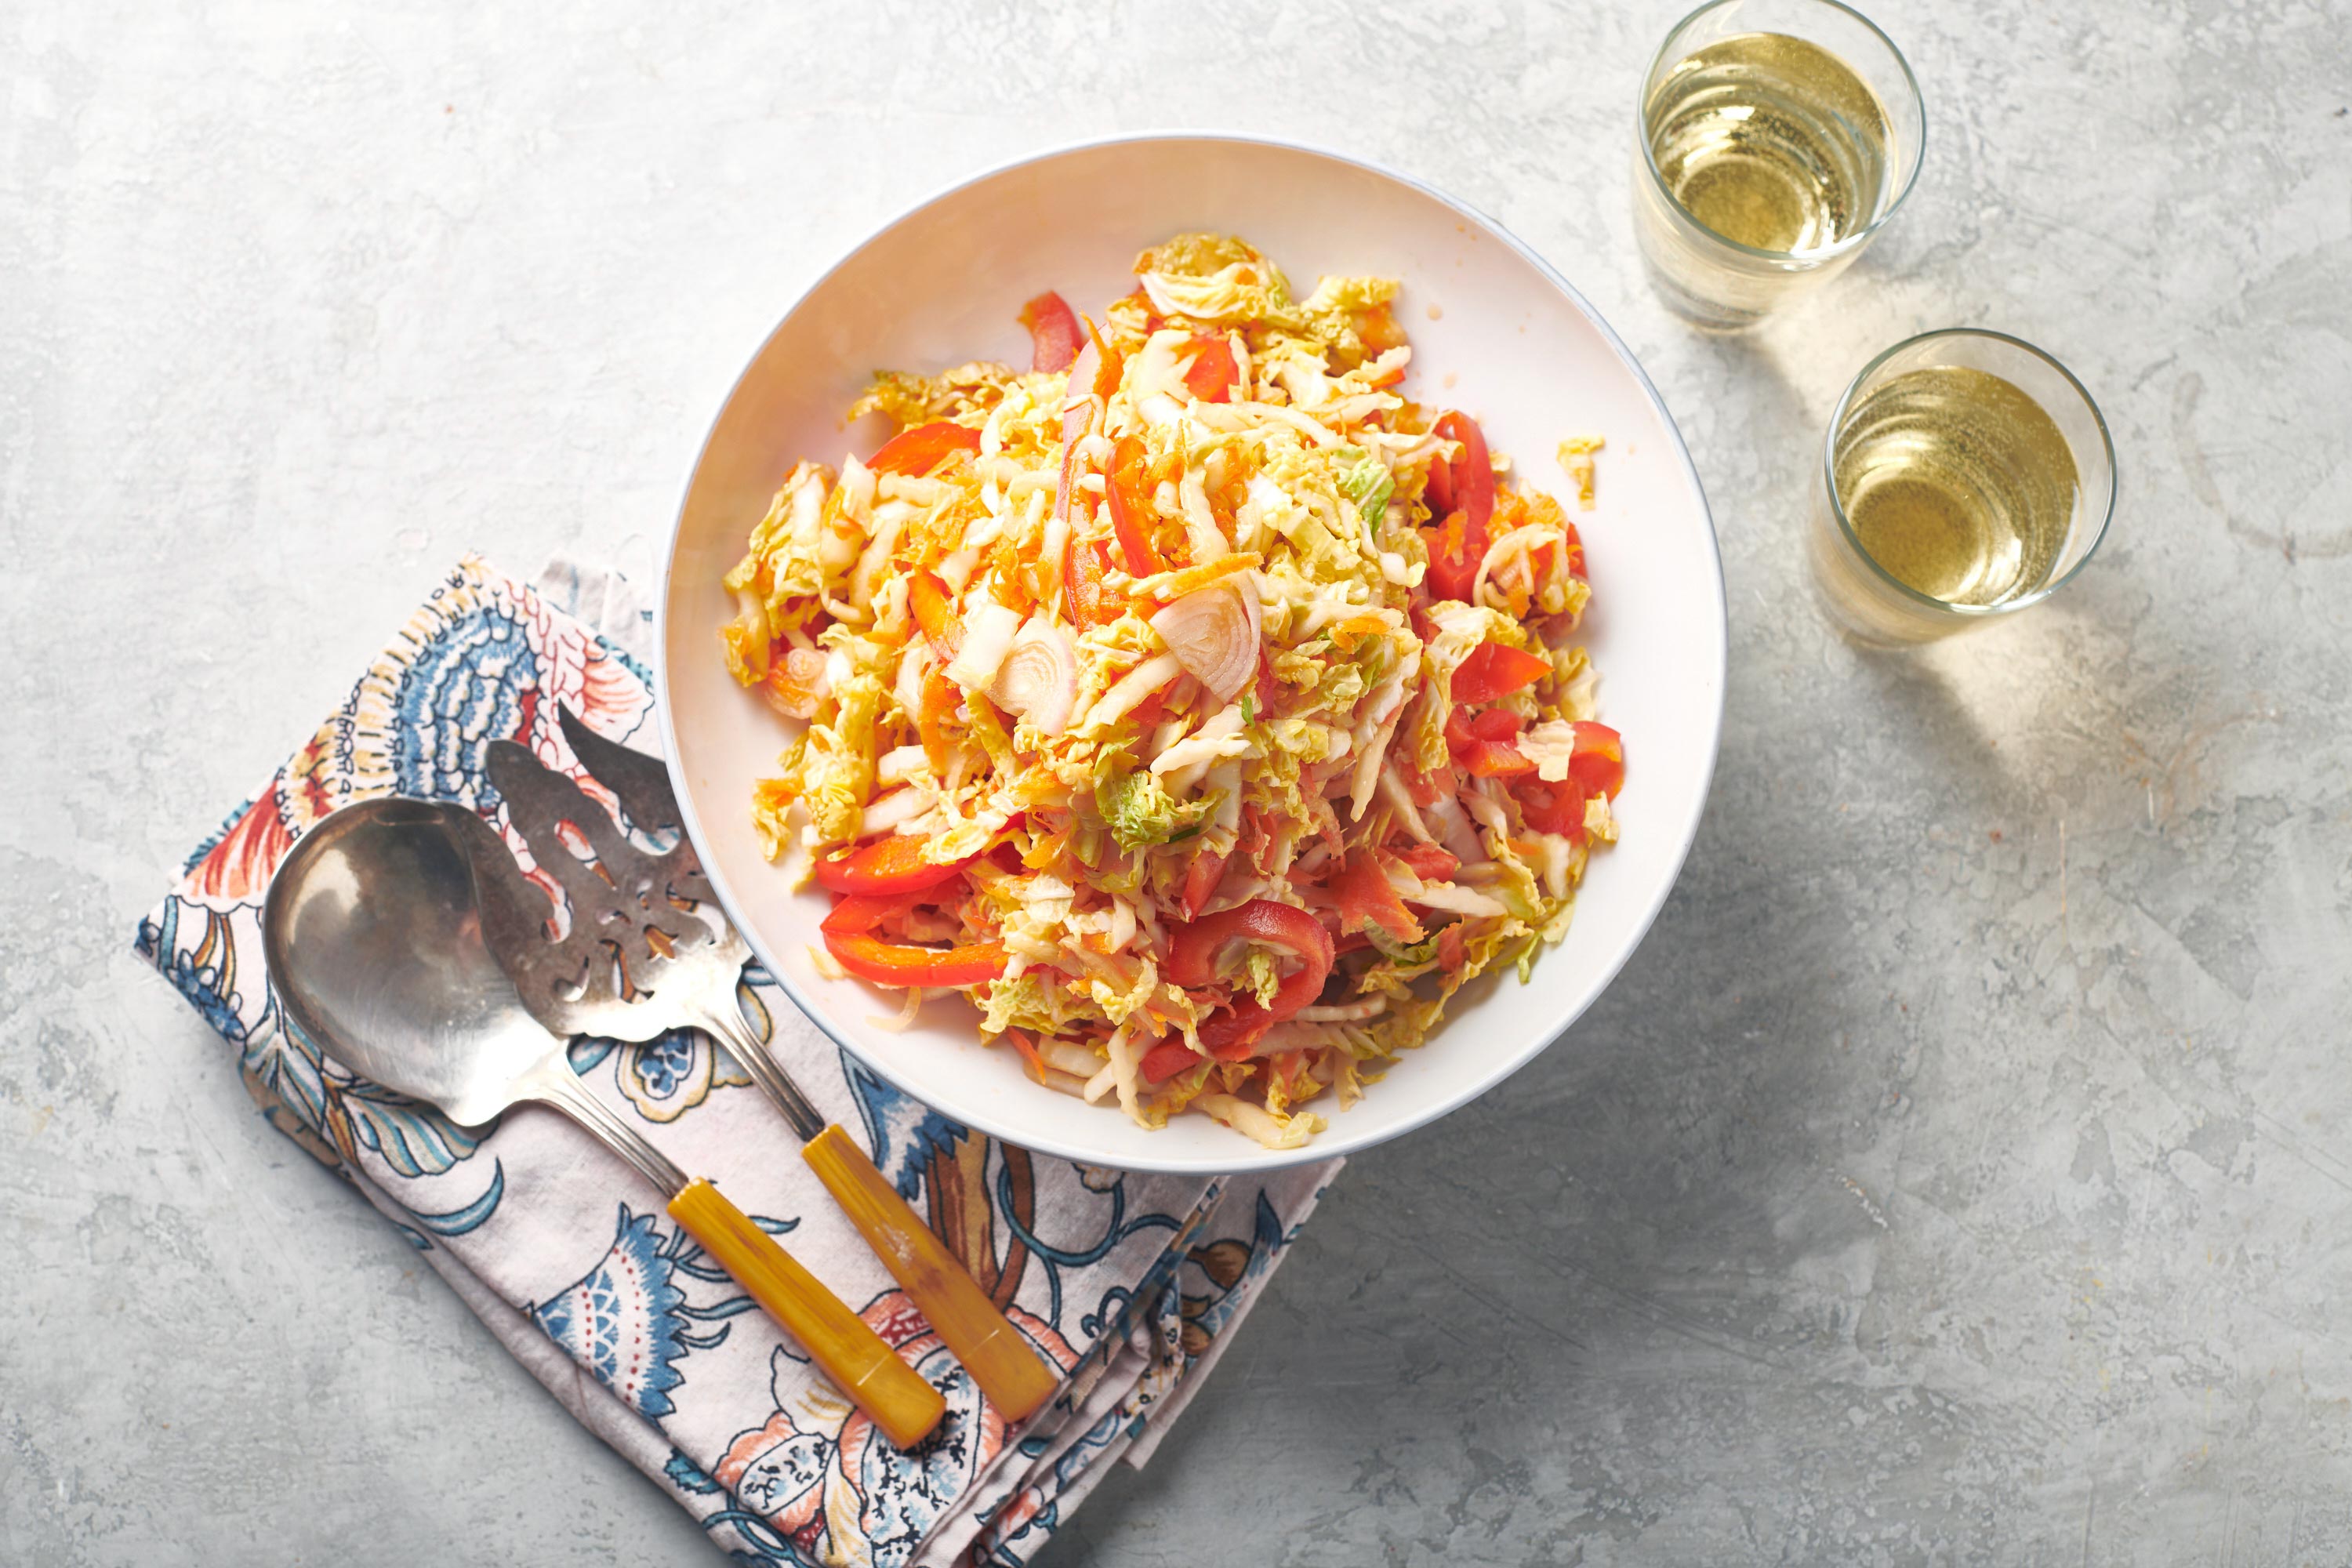 Vegan Asian Napa Cabbage Slaw in a white bowl next to silverware and glasses.